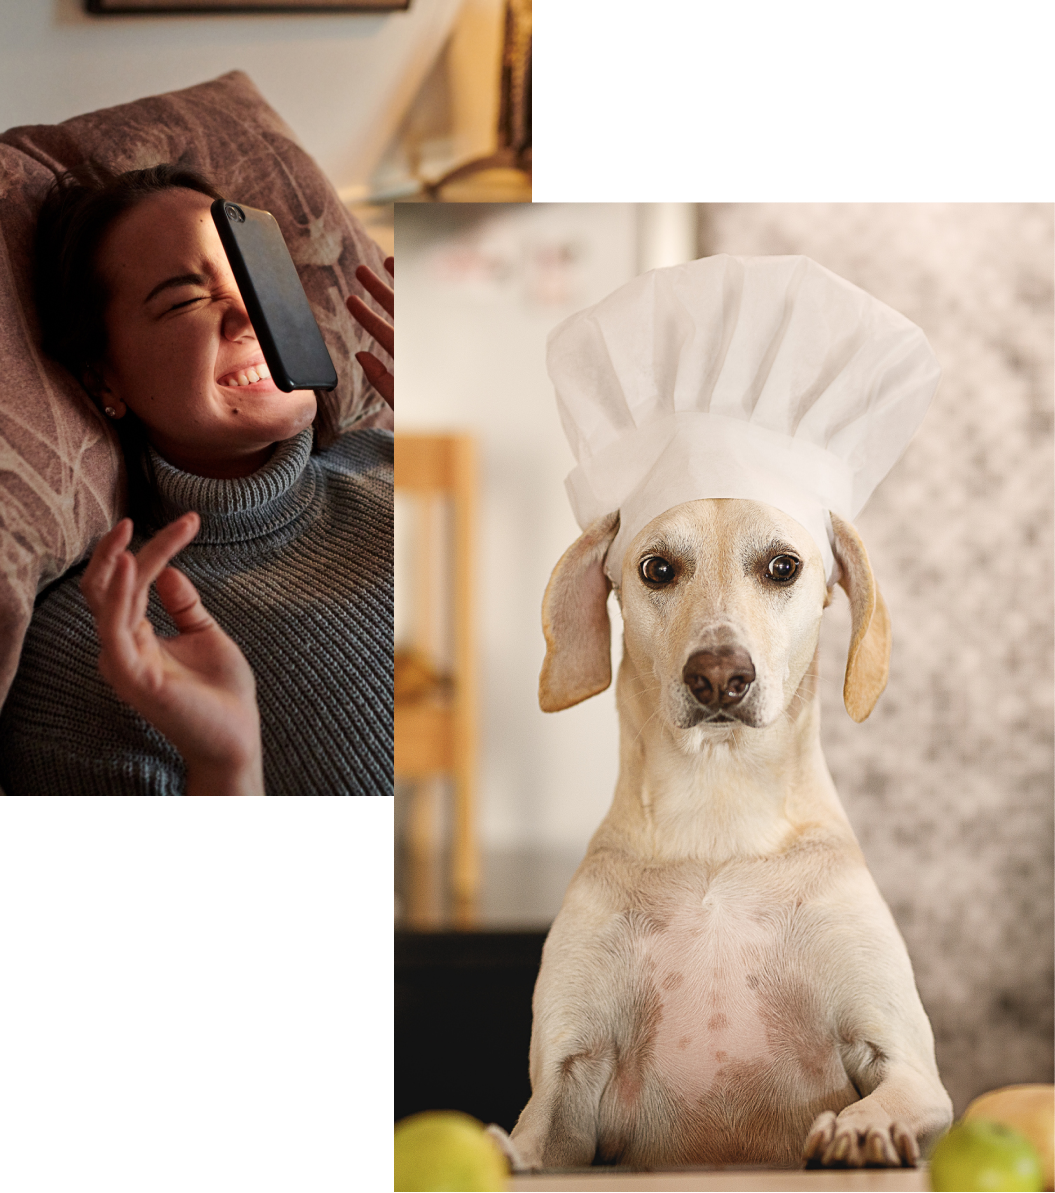 Examples of memes. Left: a woman drops her phone on her face. Right: a dog wearing a chef hat